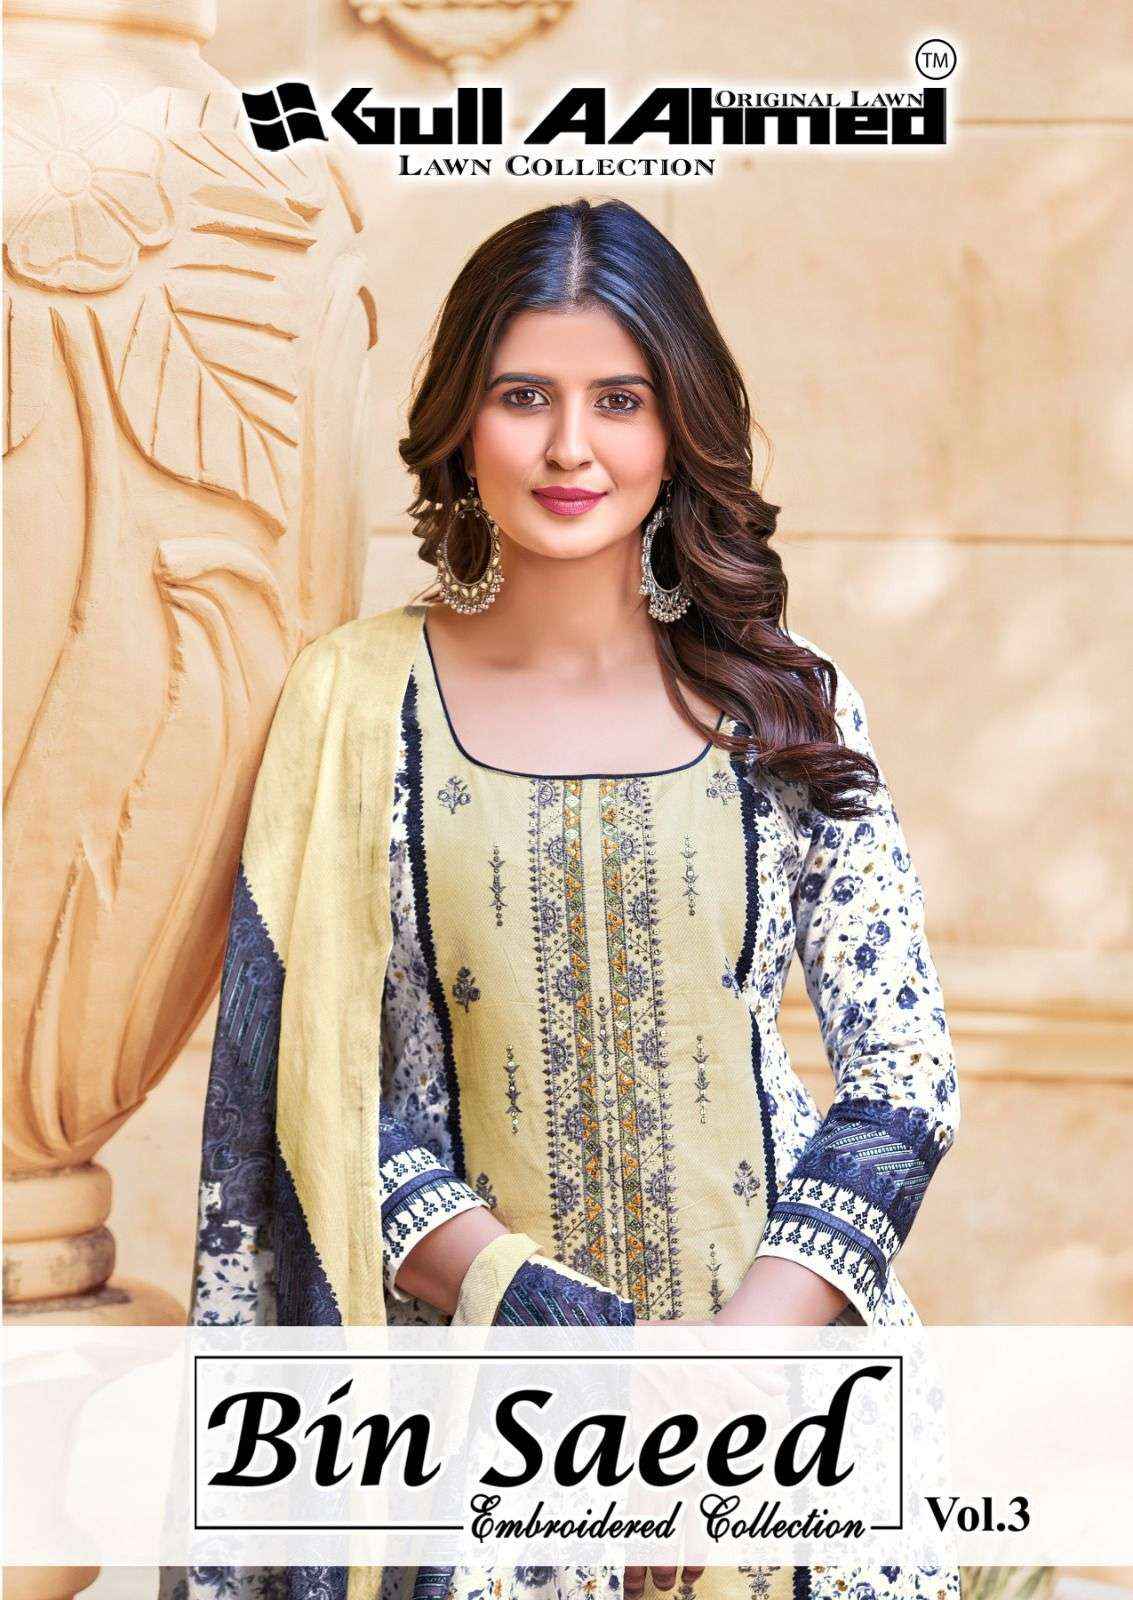 Gull Ahmed Bin Saeed Embroidered Collection Vol 3 Lawn Cotton Dress Material 6 pcs Catalogue